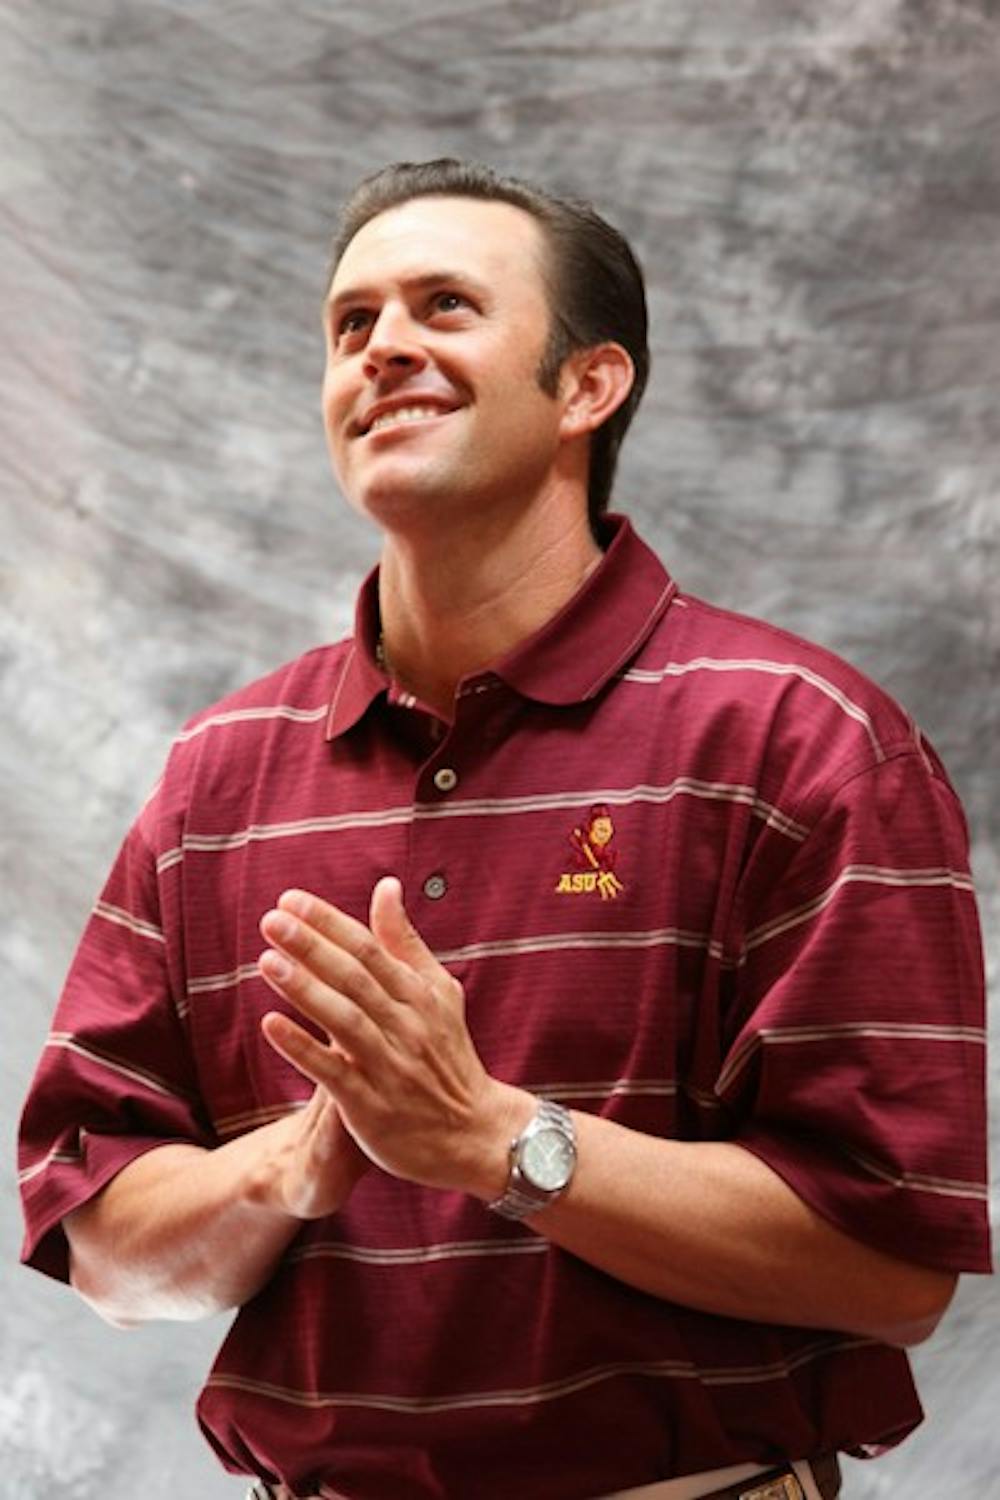 NEW ERA: Tim Mickelson poses for photos on Thursday at the Carson Student Athlete Center. Mickelson was recently hired as the new head coach for ASU men's golf. (Photo by Lisa Bartoli)